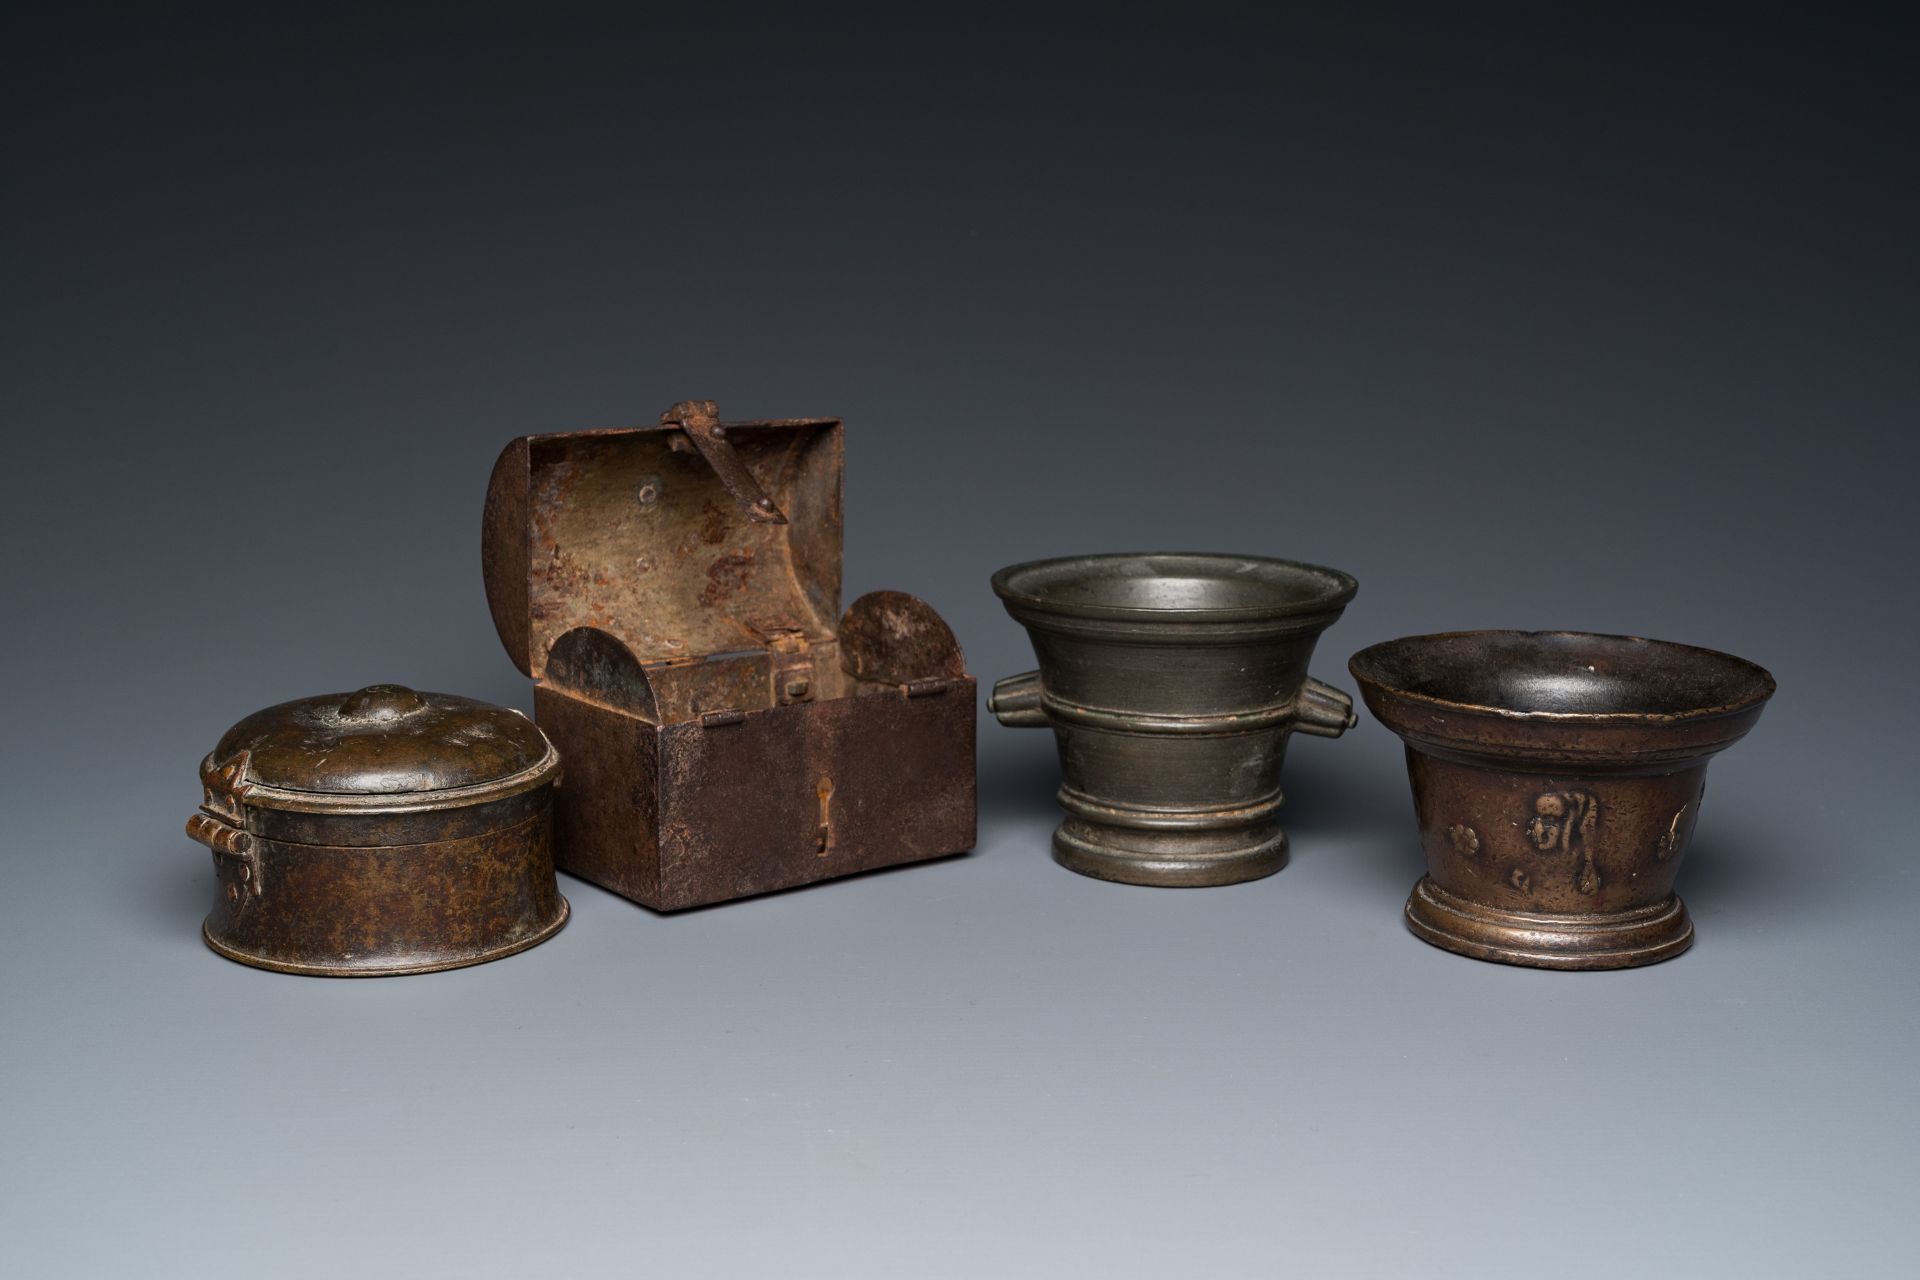 Two bronze mortars, a round lidded box and an iron casket, Western Europe, 16/17th C. - Image 2 of 9